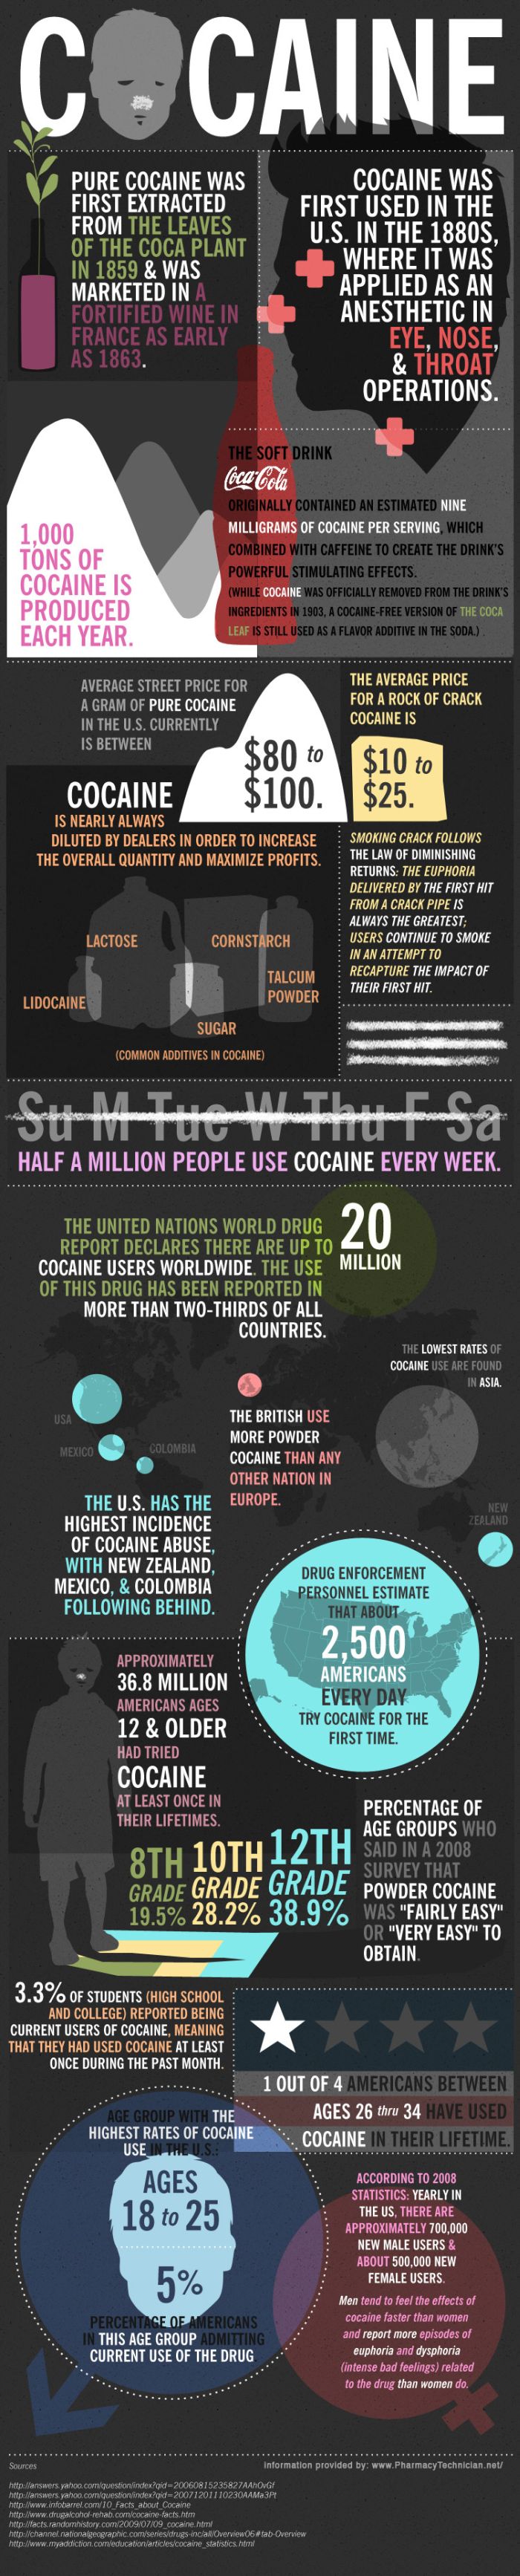 Facts About Cocaine (infographic)